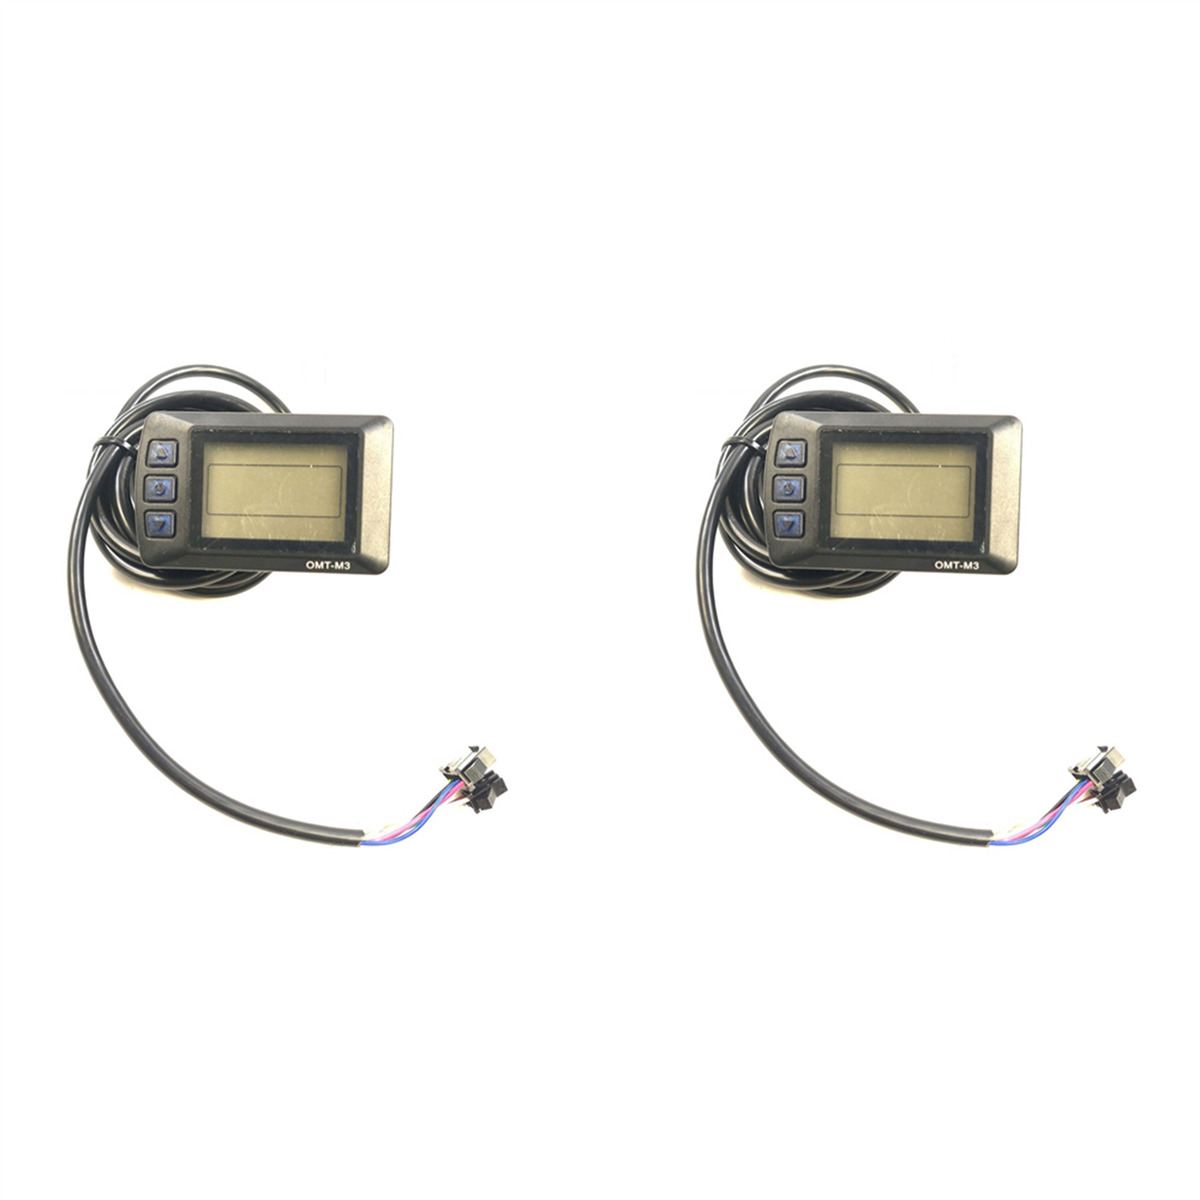 2X Electric Bicycle Accessories OMT-M3 36V48V LCD Display with Accessories for E-Bike LCD Control Panel Accessories